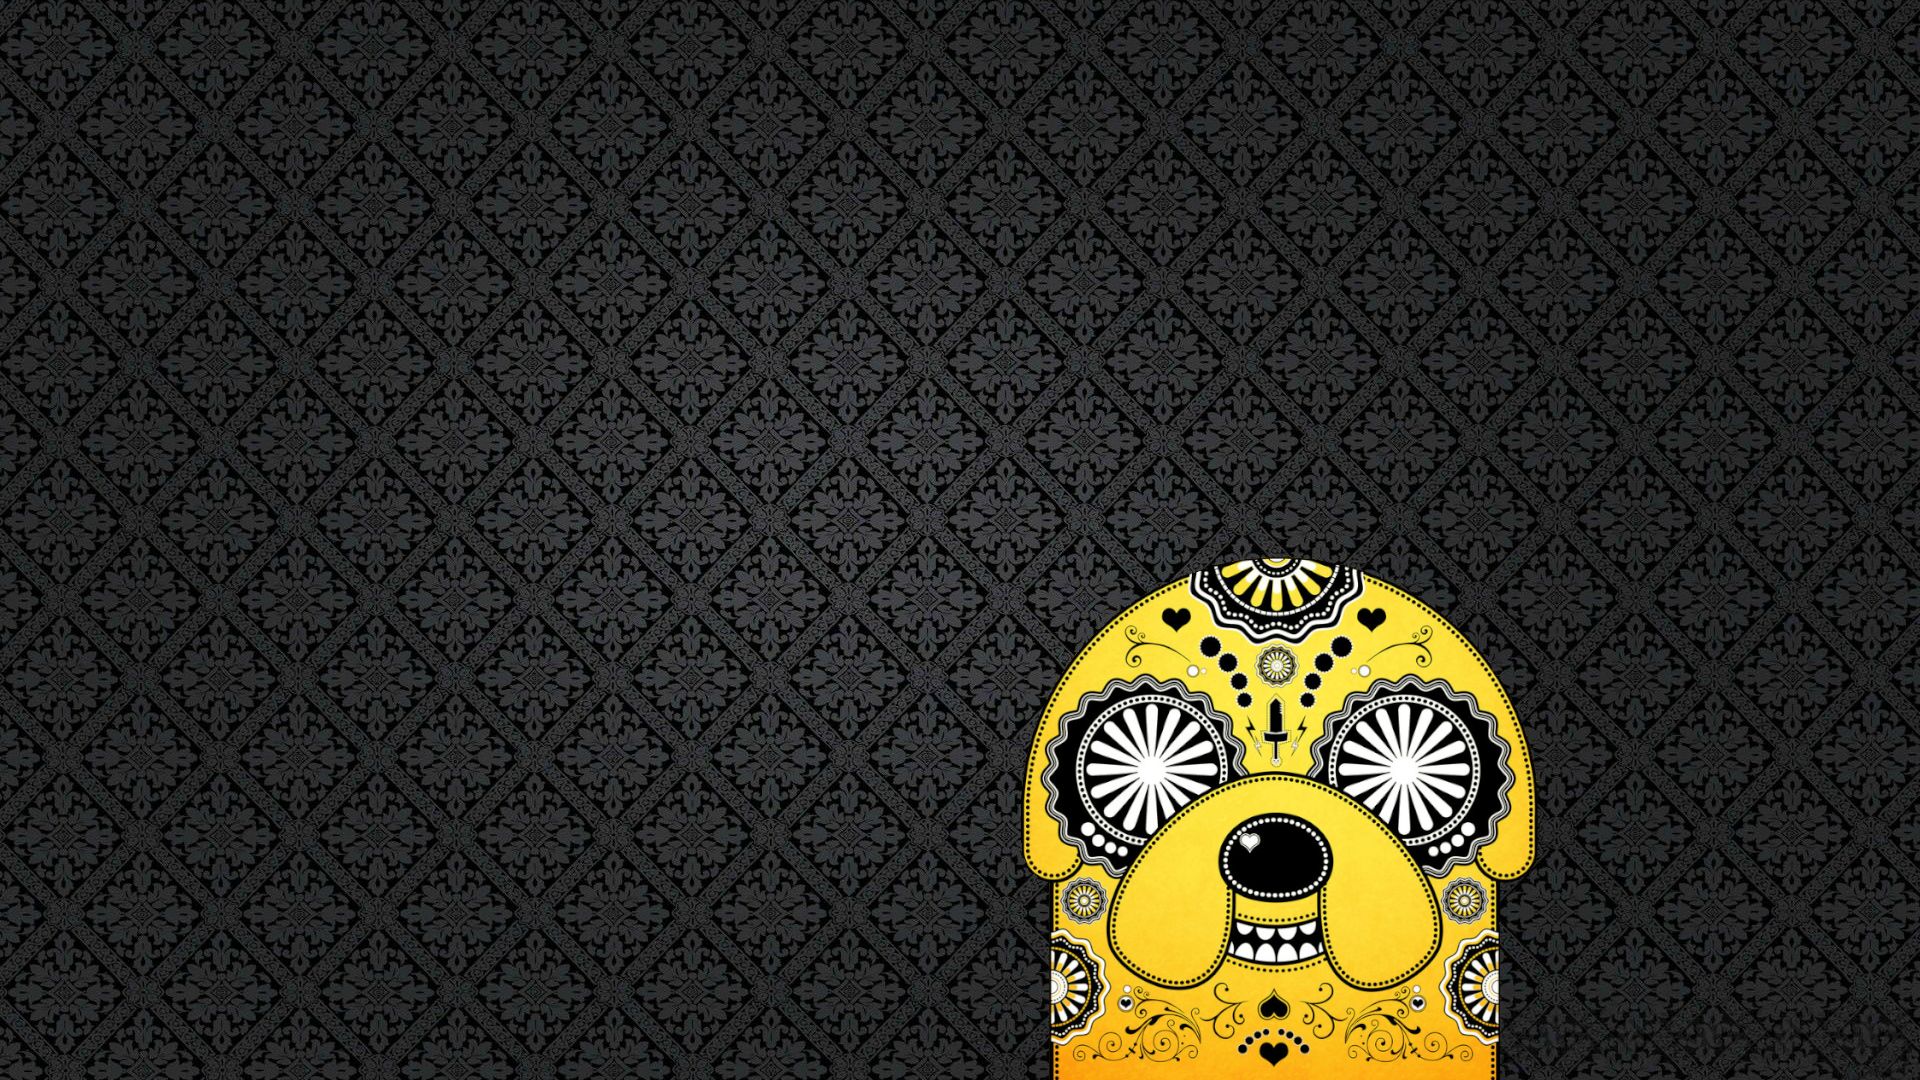 Jake The Dog With Sick Patterns Requested Wallpaper